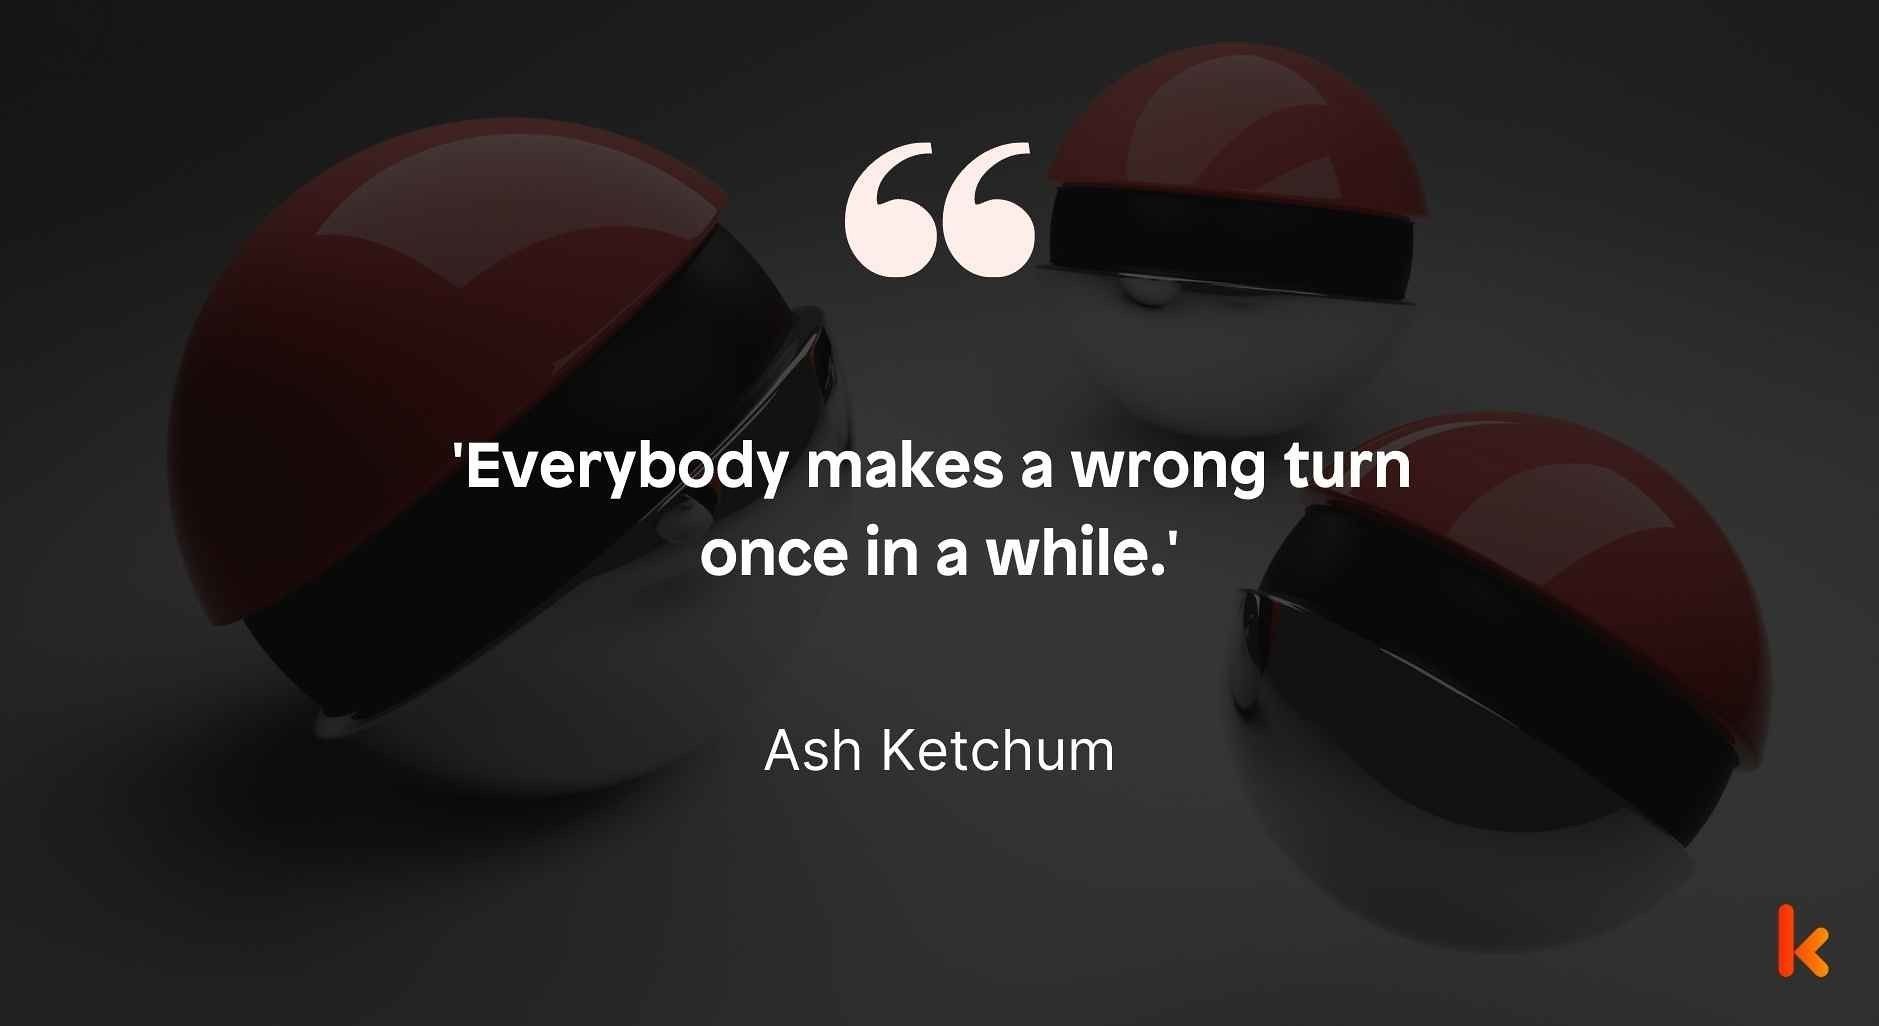 Quote by Ash Ketchum